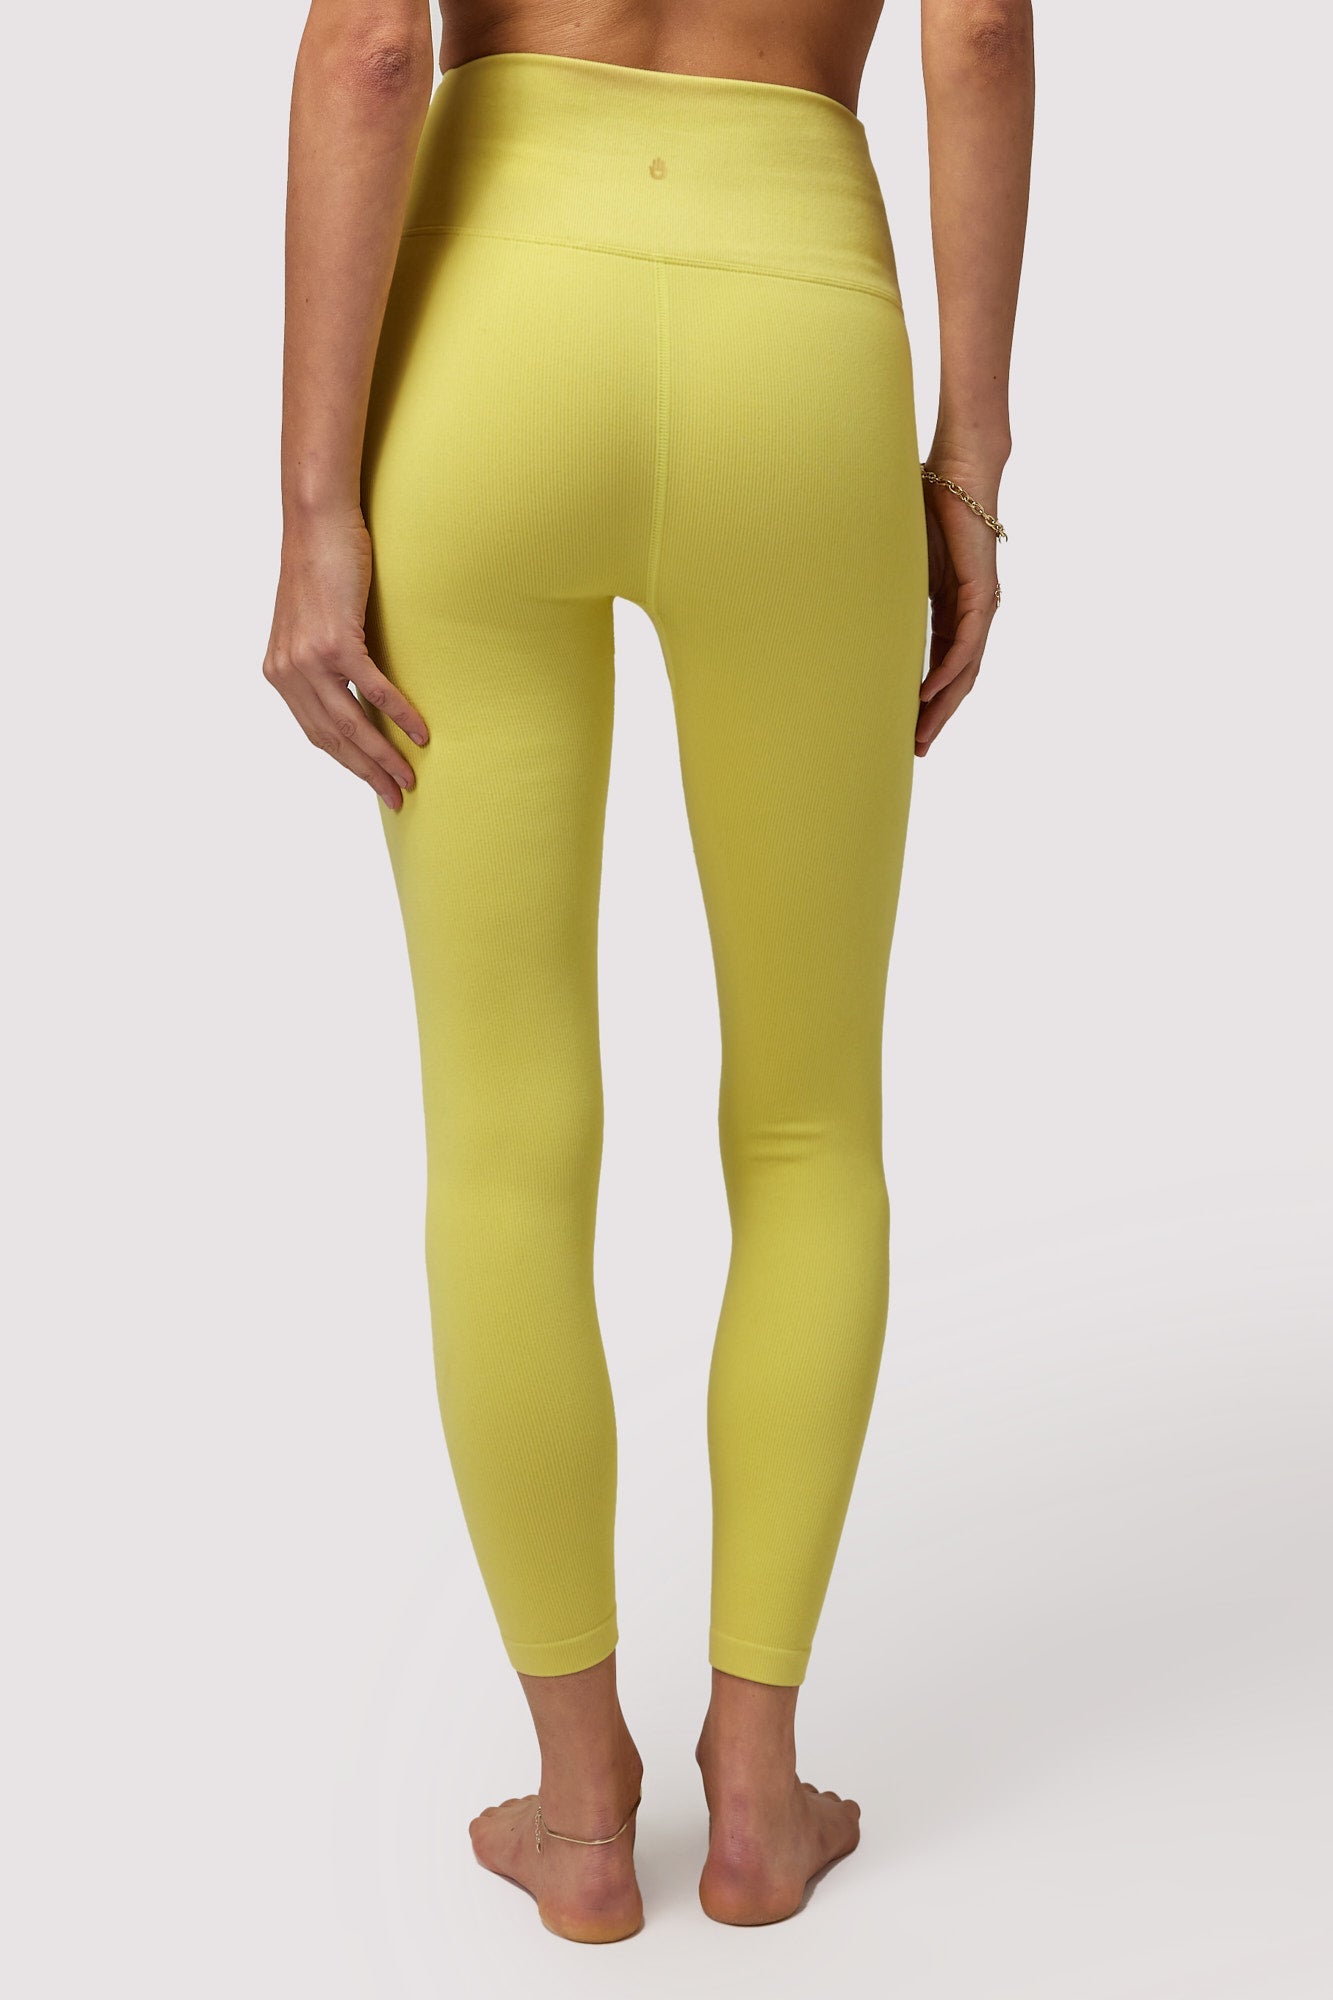 Funky Yellow Tribal Ankle Leggings - Fashion Outlet NYC